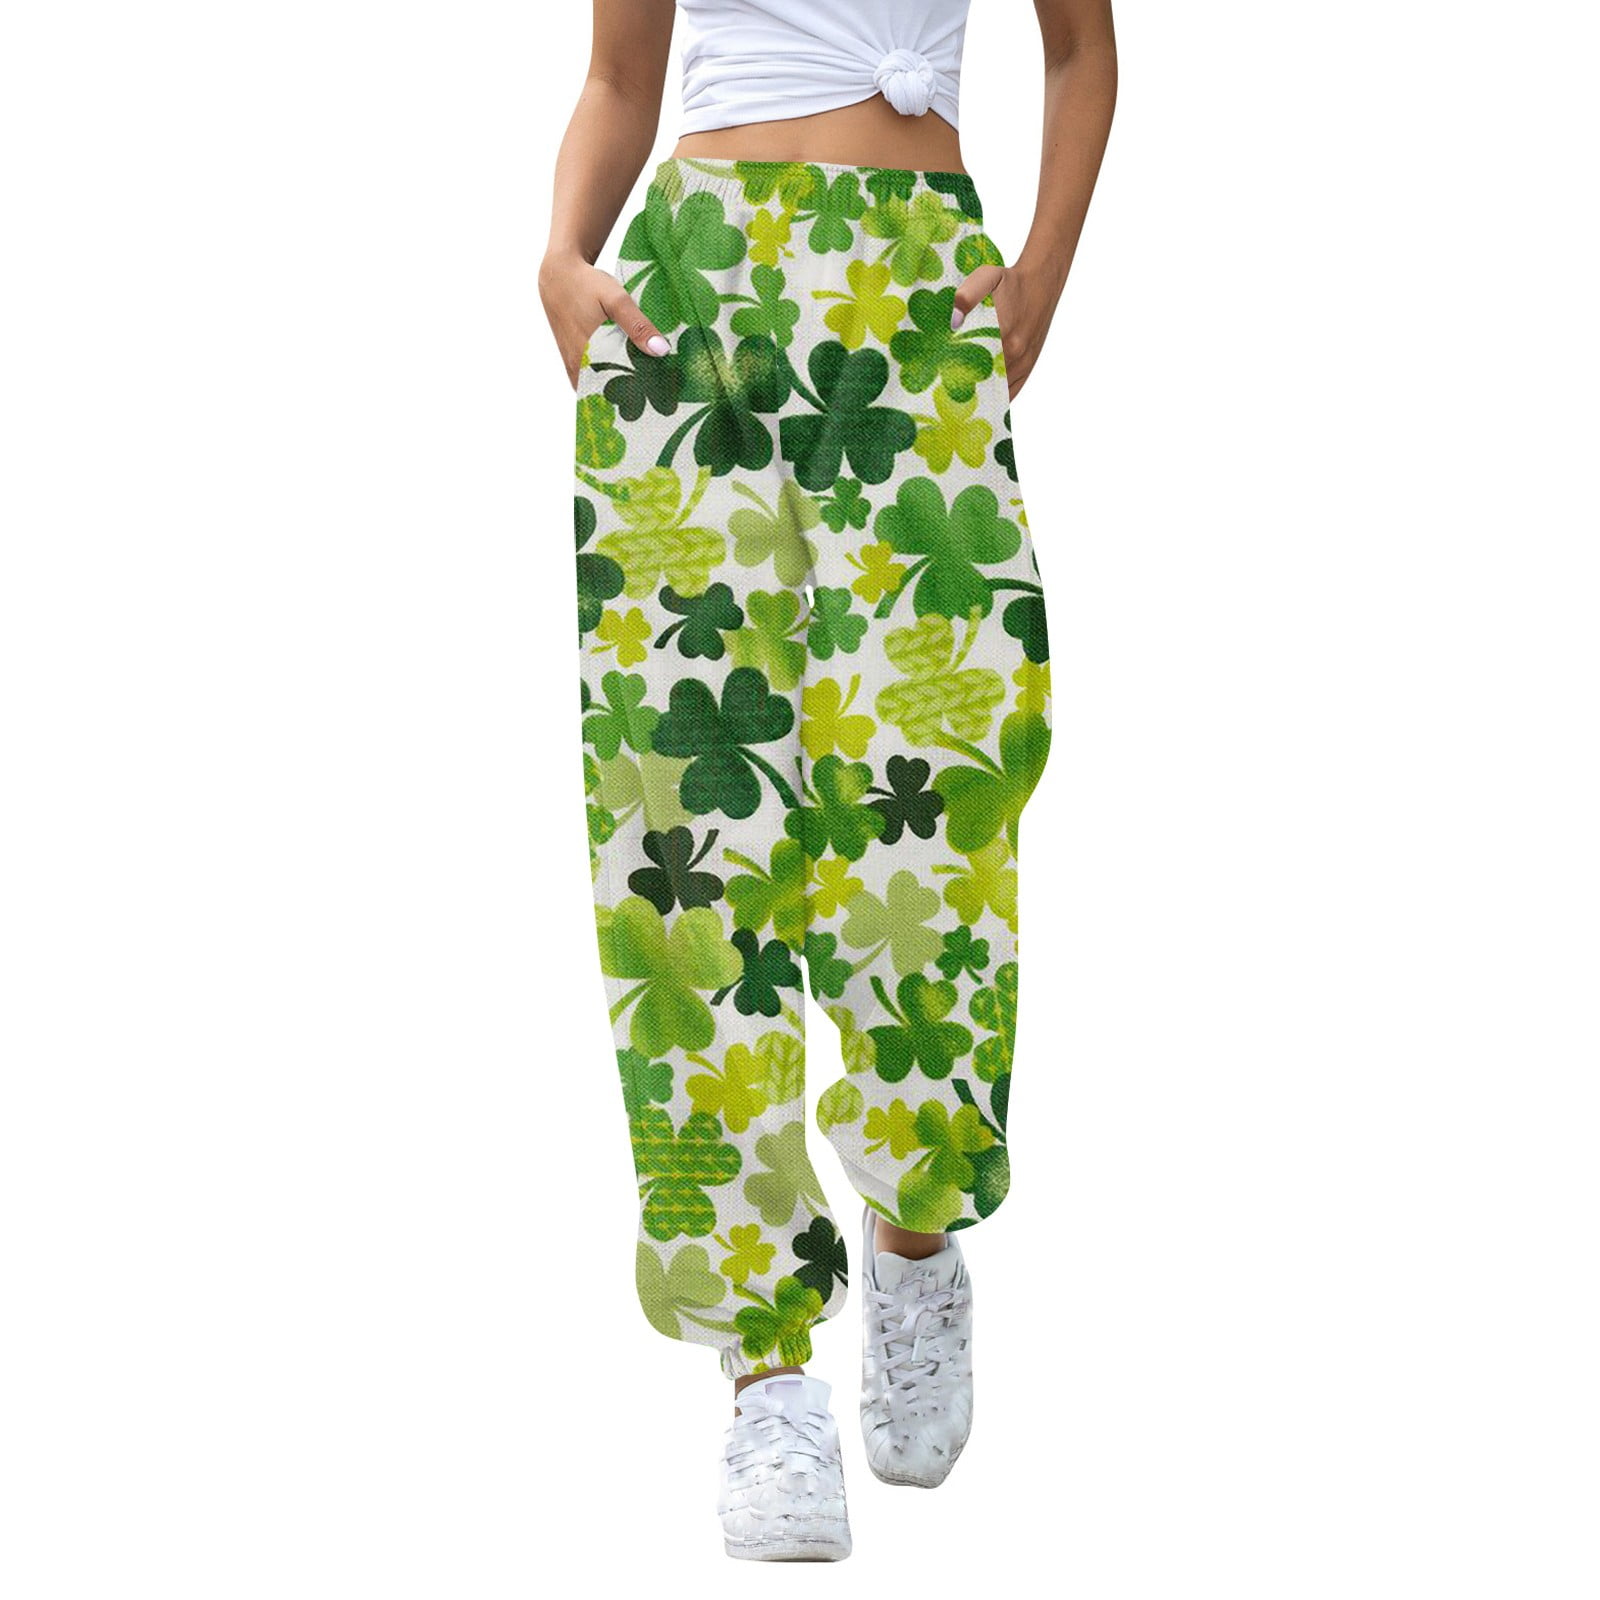 St. Patricks Day Plus Size Petite Sweatpants for Women High Waisted ...